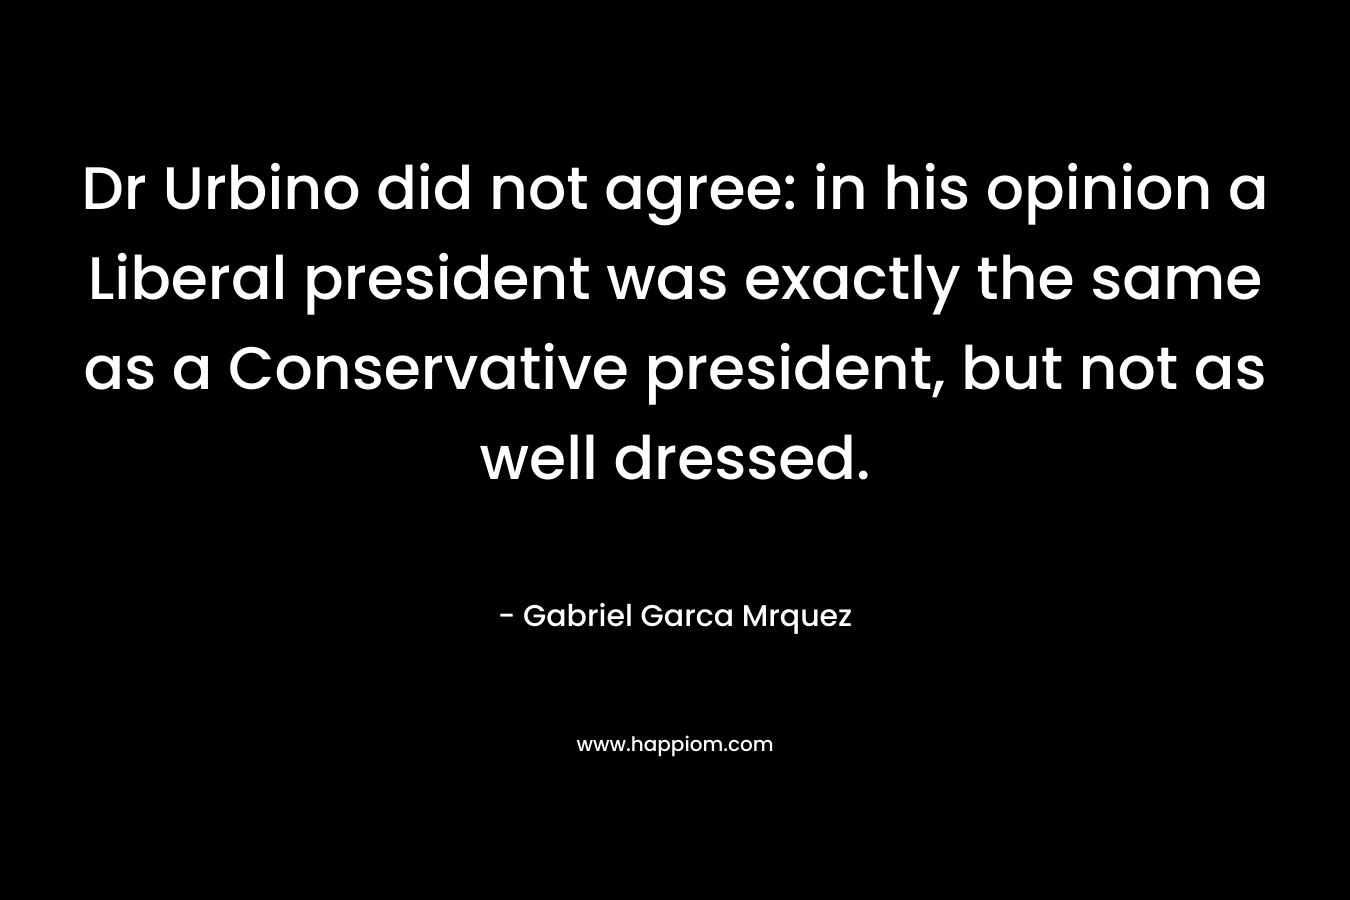 Dr Urbino did not agree: in his opinion a Liberal president was exactly the same as a Conservative president, but not as well dressed.